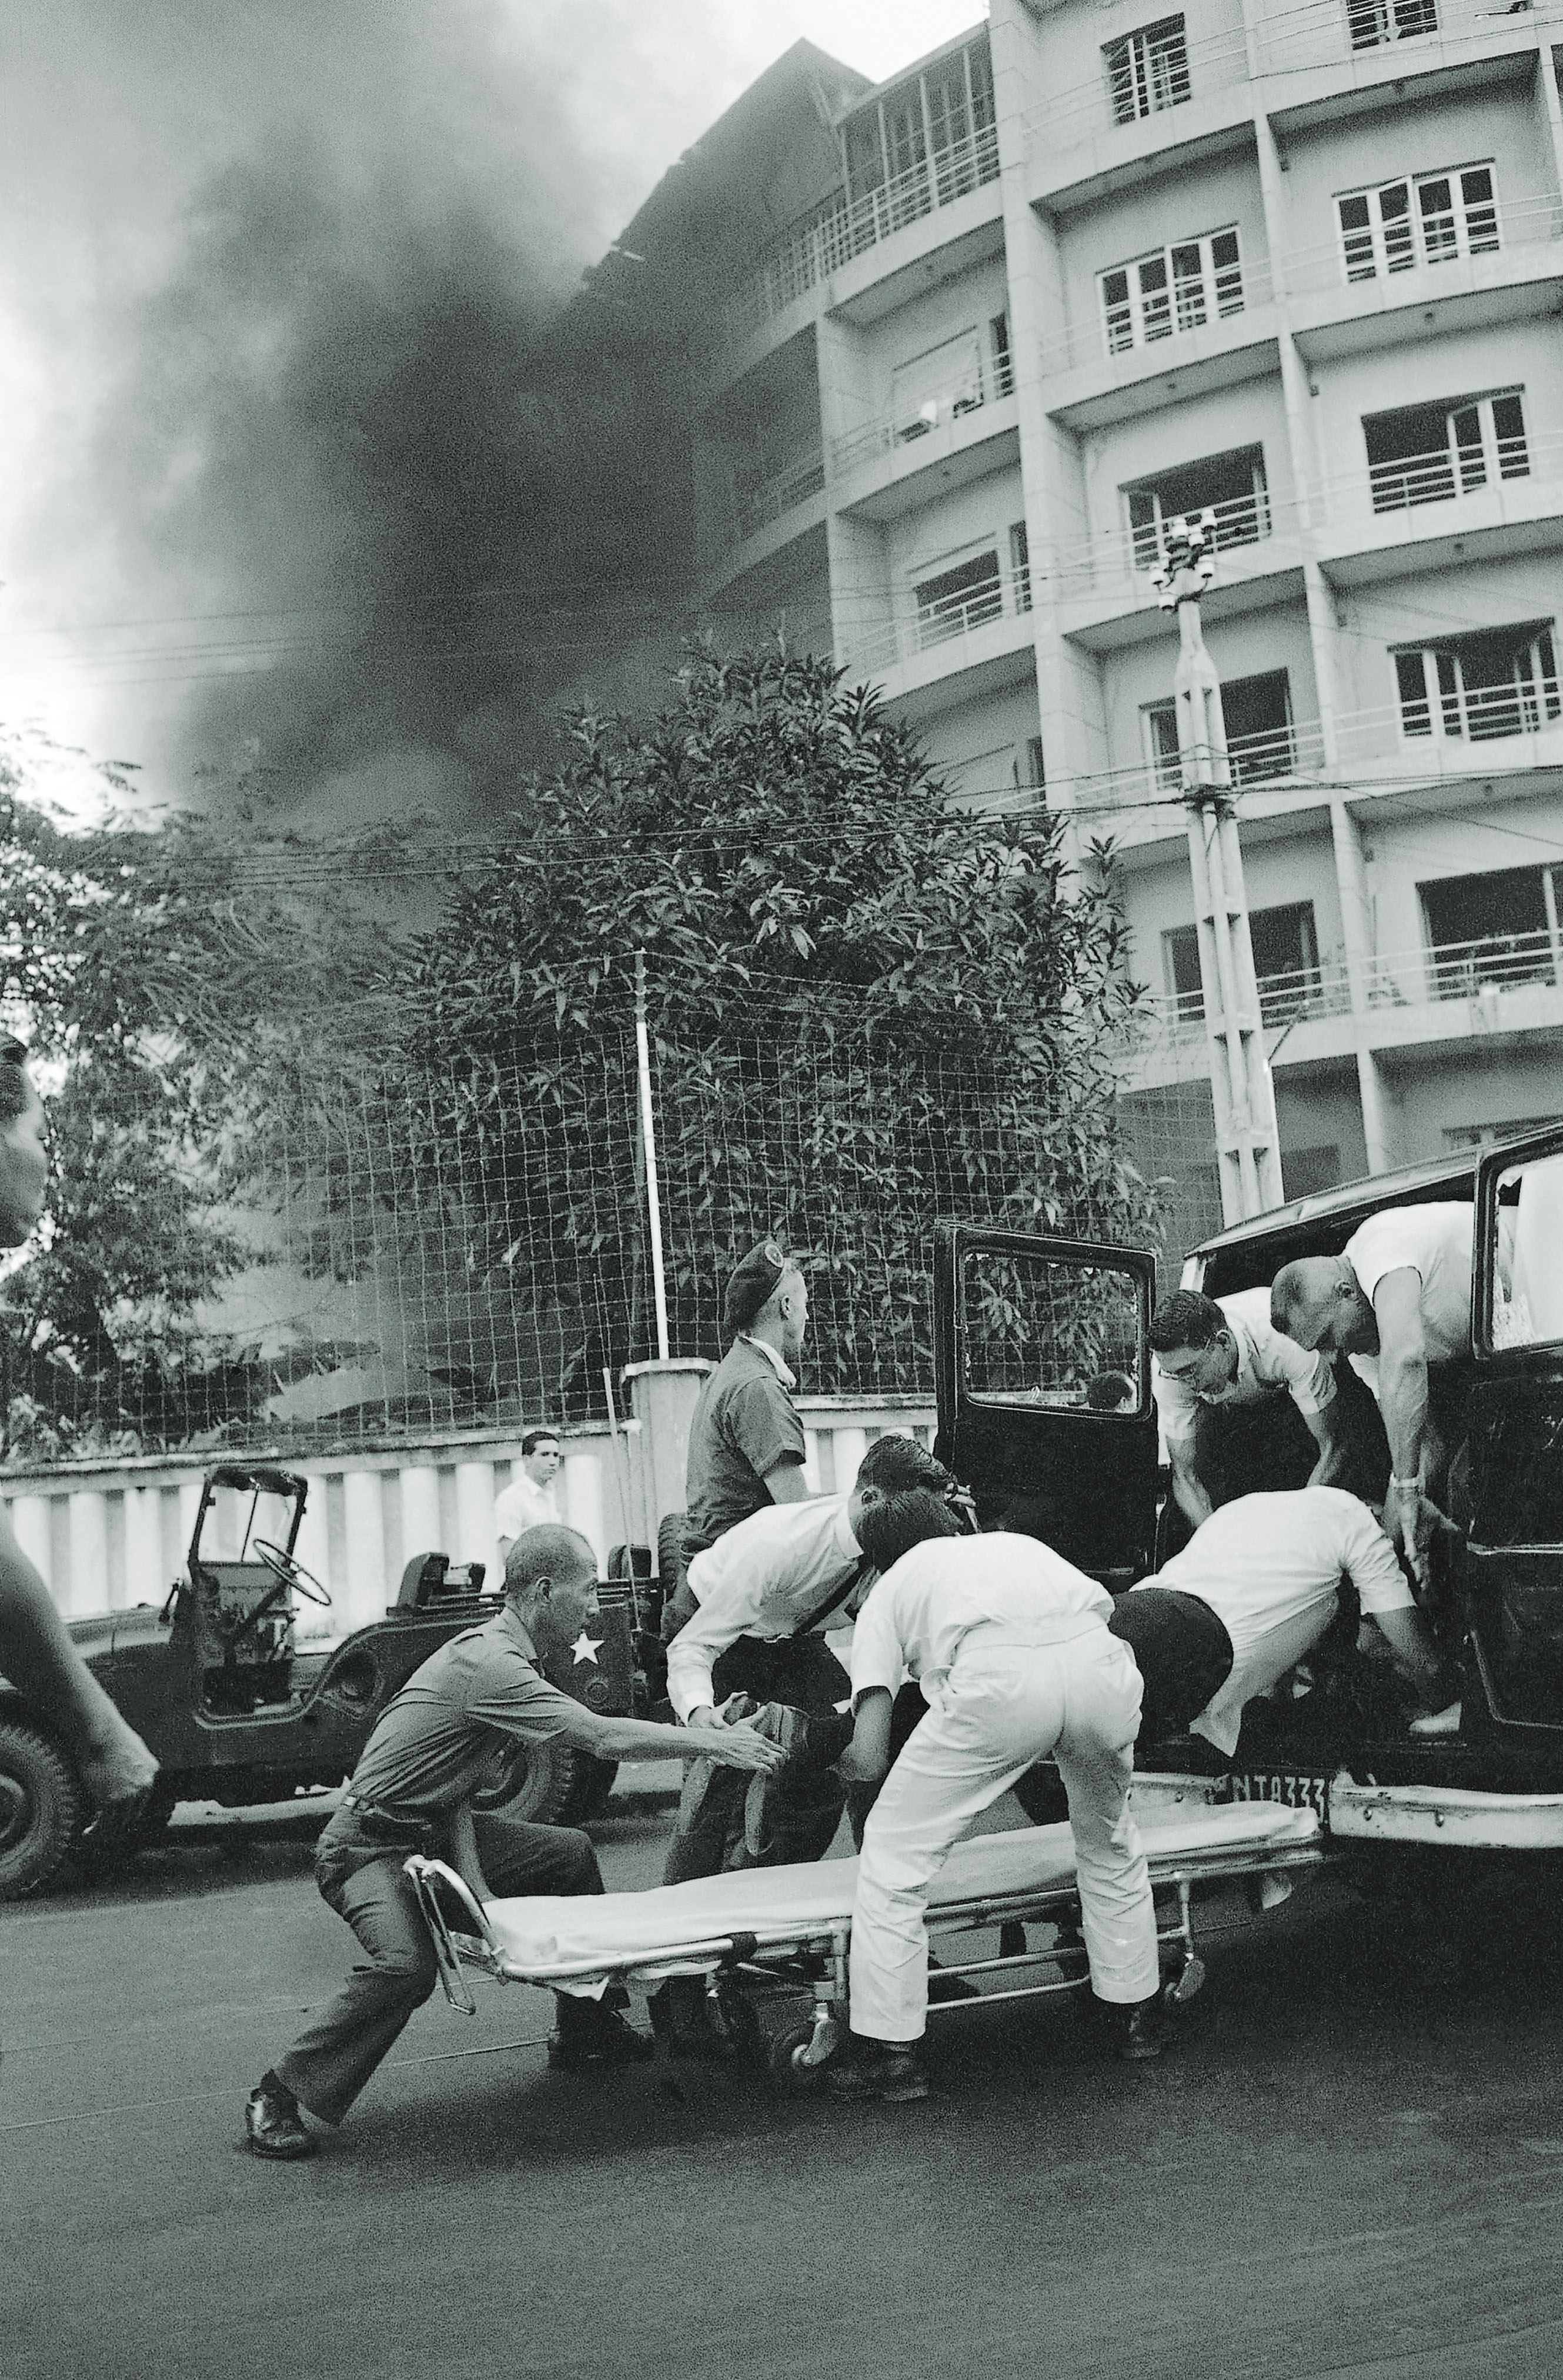 An American officer wounded by a Viet Cong bomb explosion is loaded into an ambulance in front of Saigon’s Brink Hotel, quarters for U.S. officers, on Dec. 24, 1964. / AP